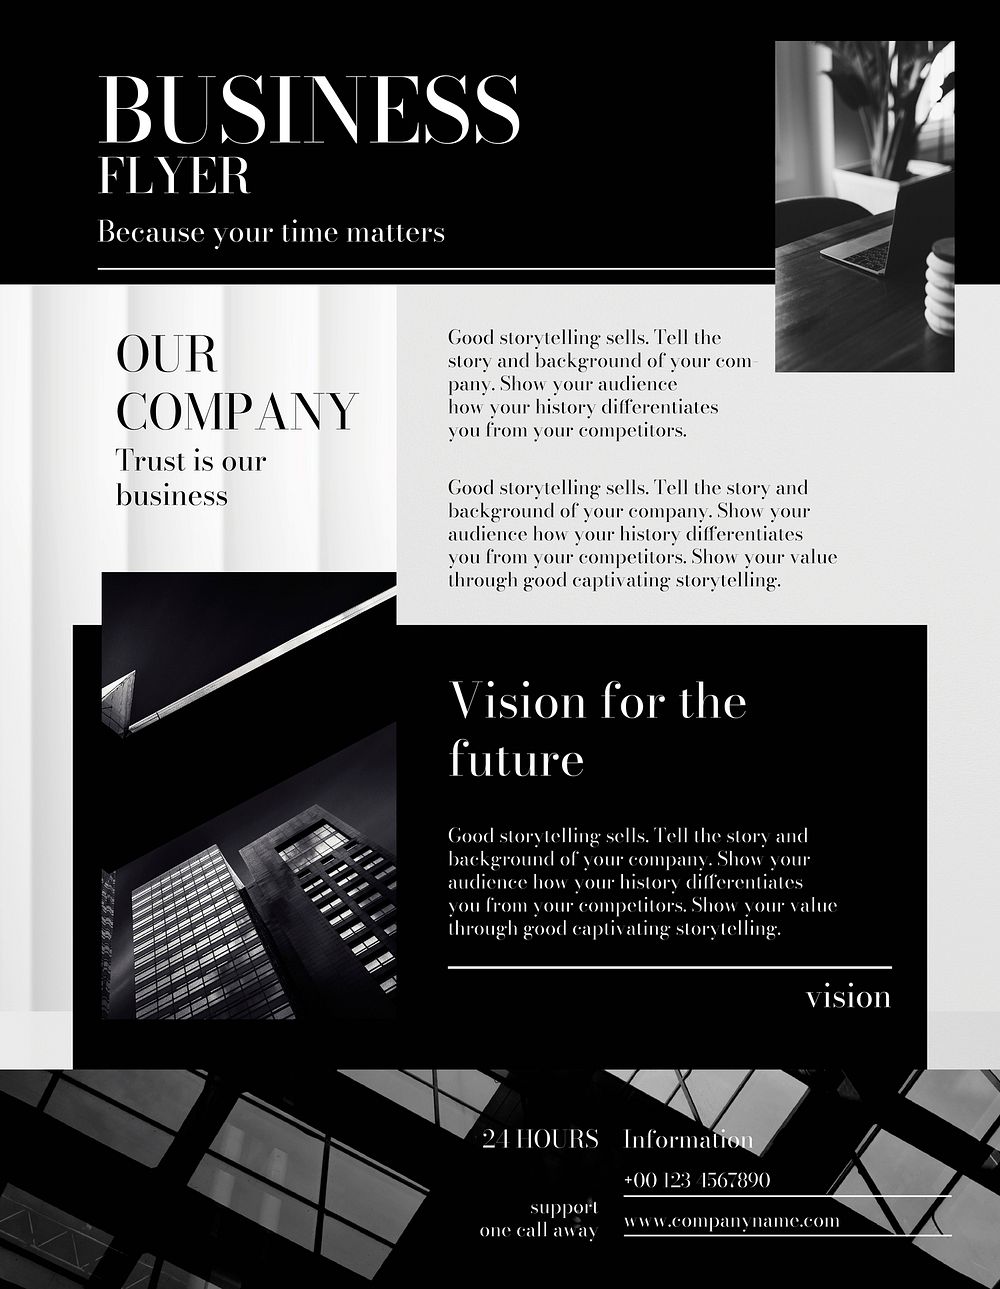 Business flyer editable template, company overview vector